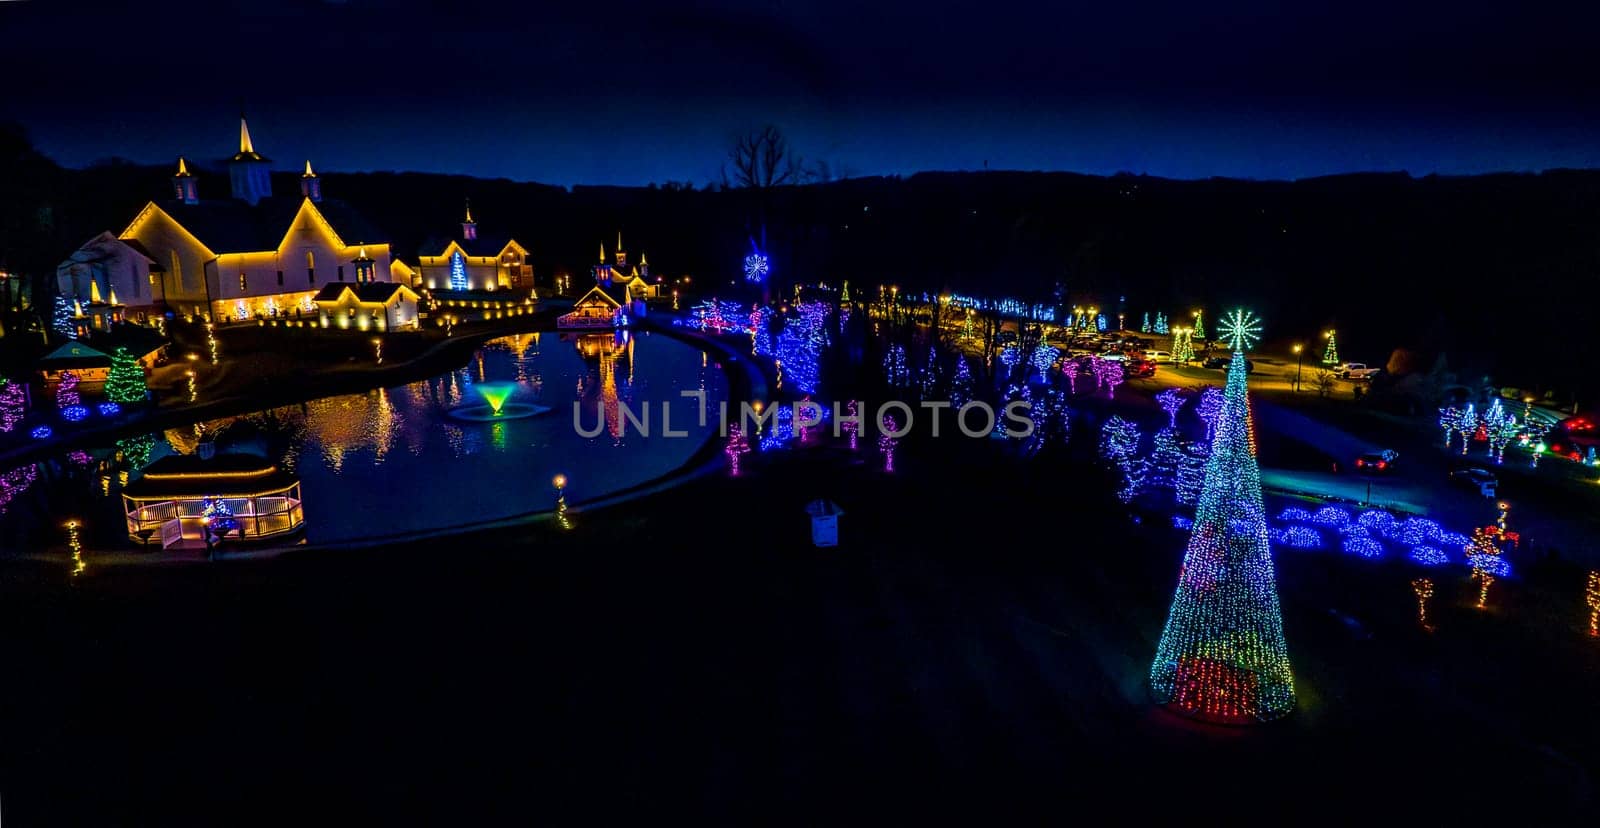 Aerial View Of A Grand Holiday Lights Display Featuring A Reflective Pond, A Giant Christmas Tree, And Buildings With Illuminated Roofs At Night.